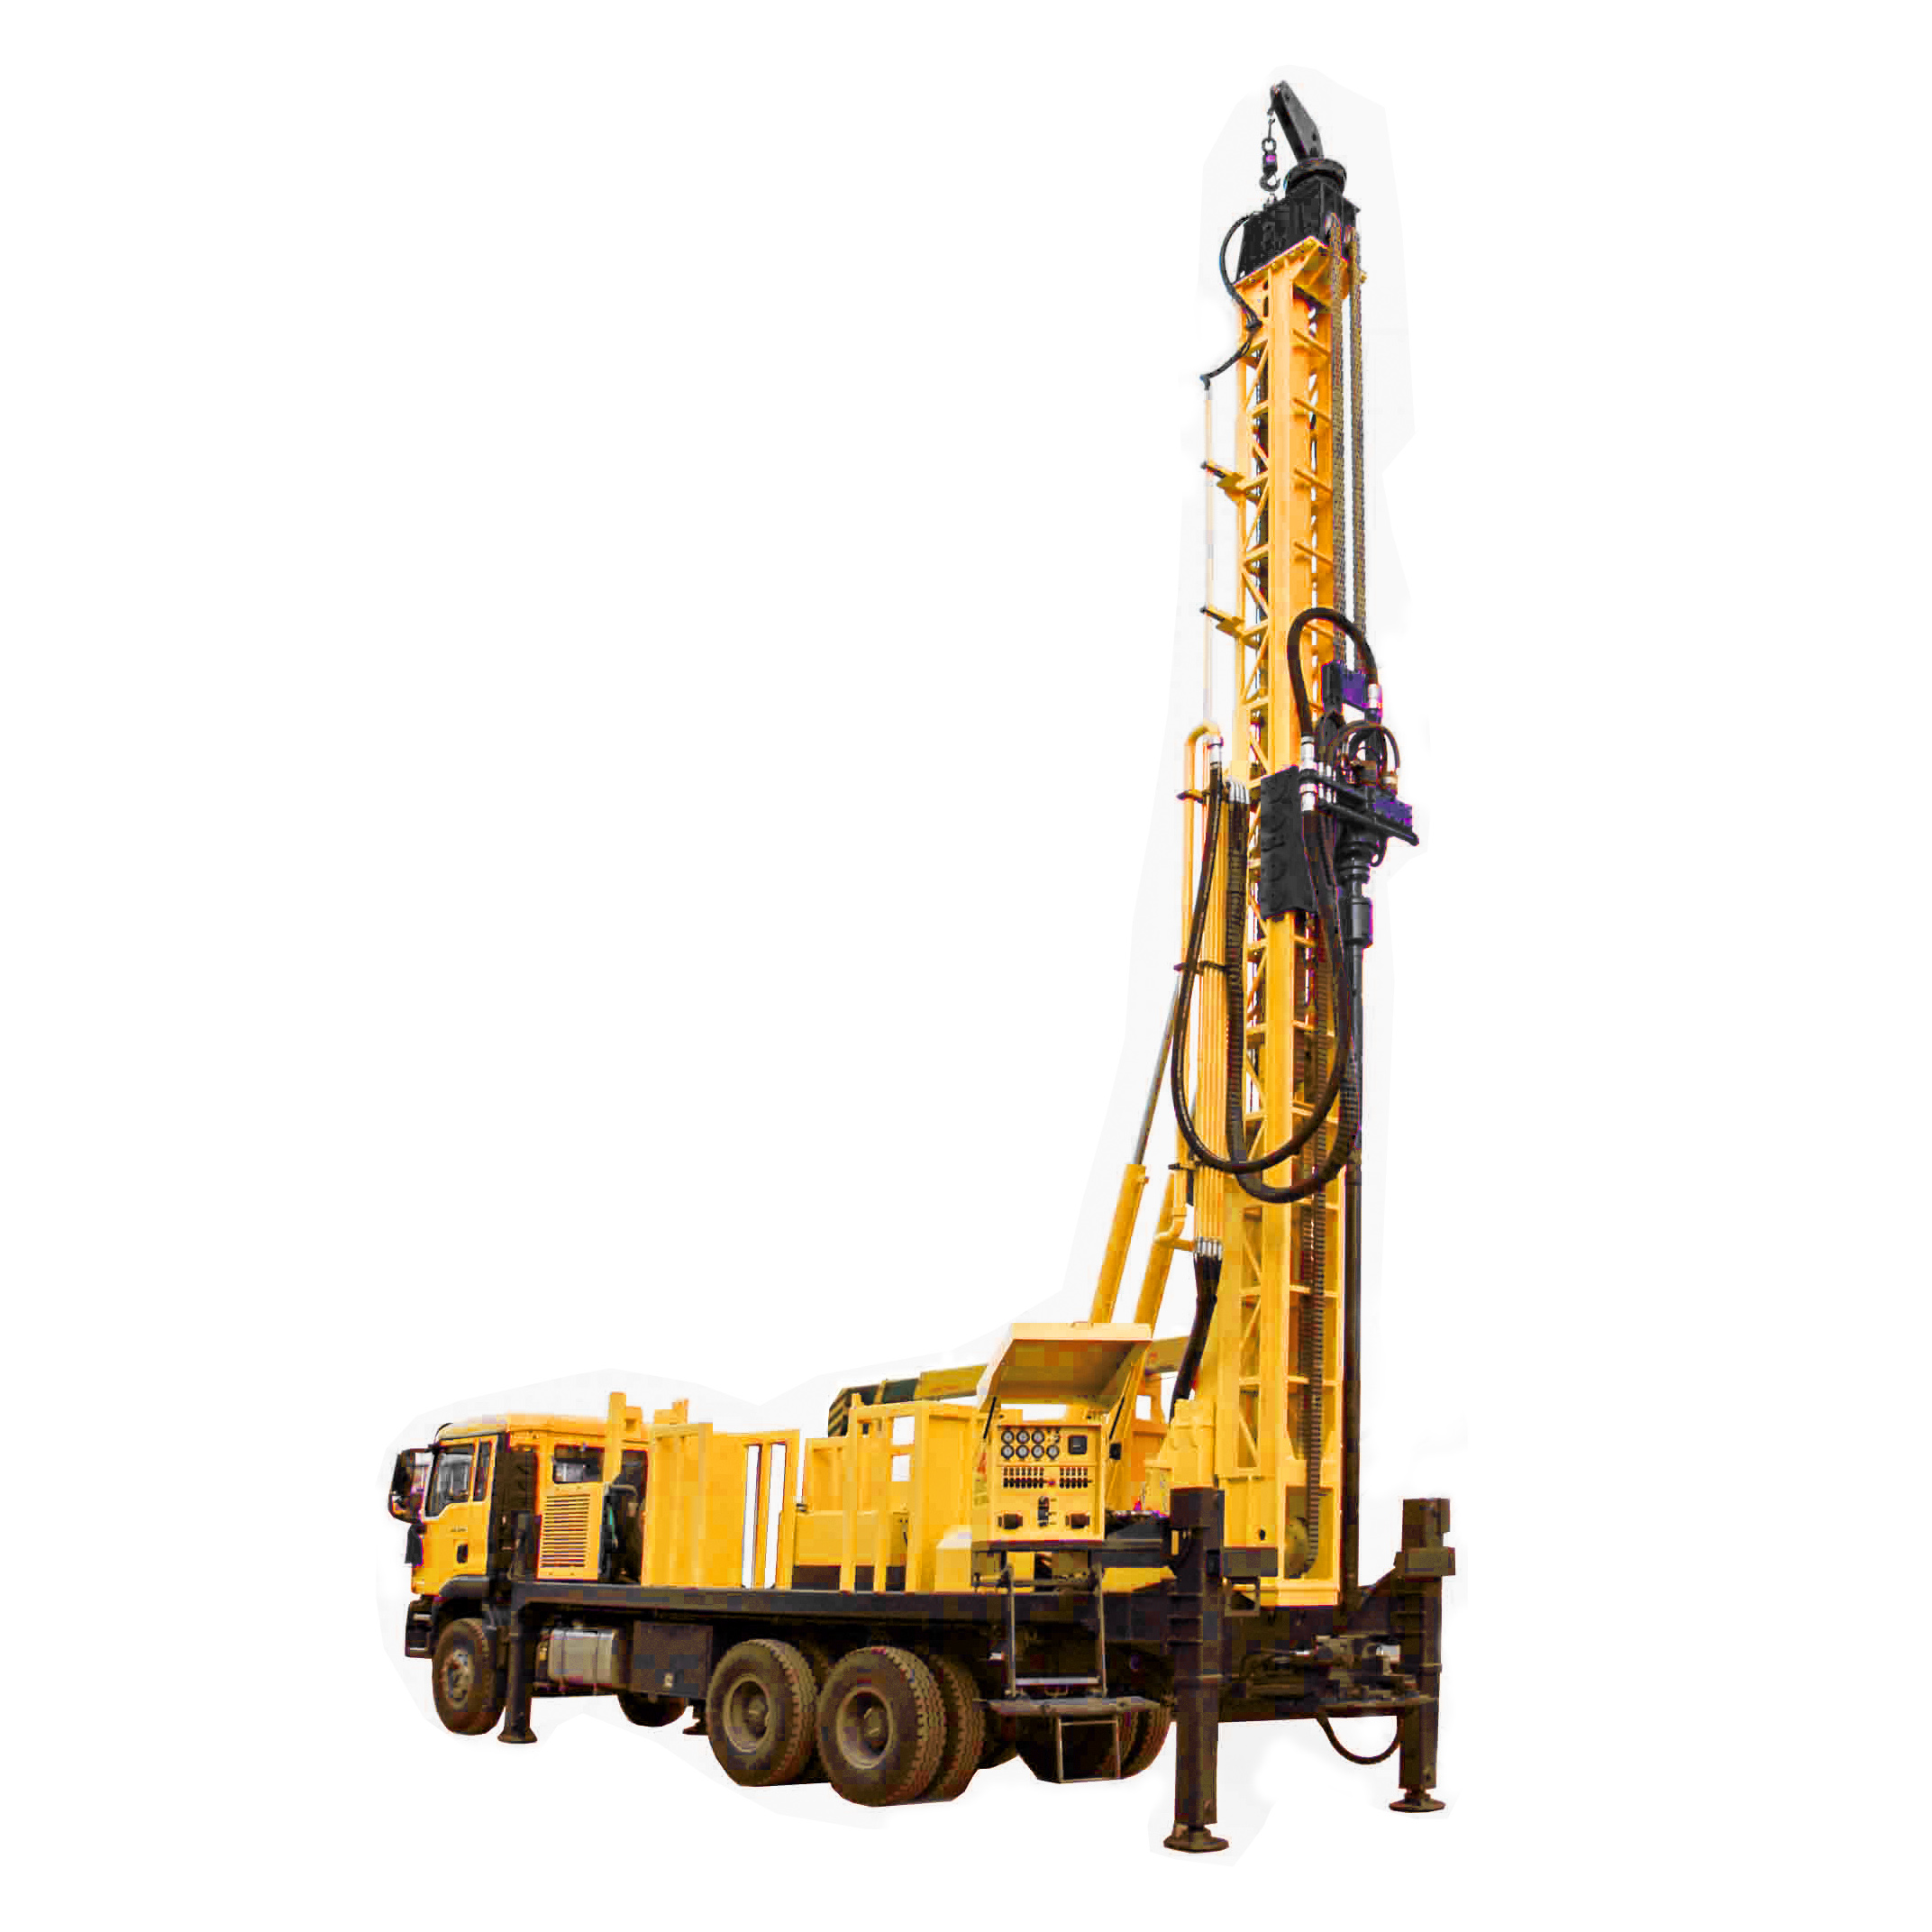 SNR1200 water well drilling rig-2